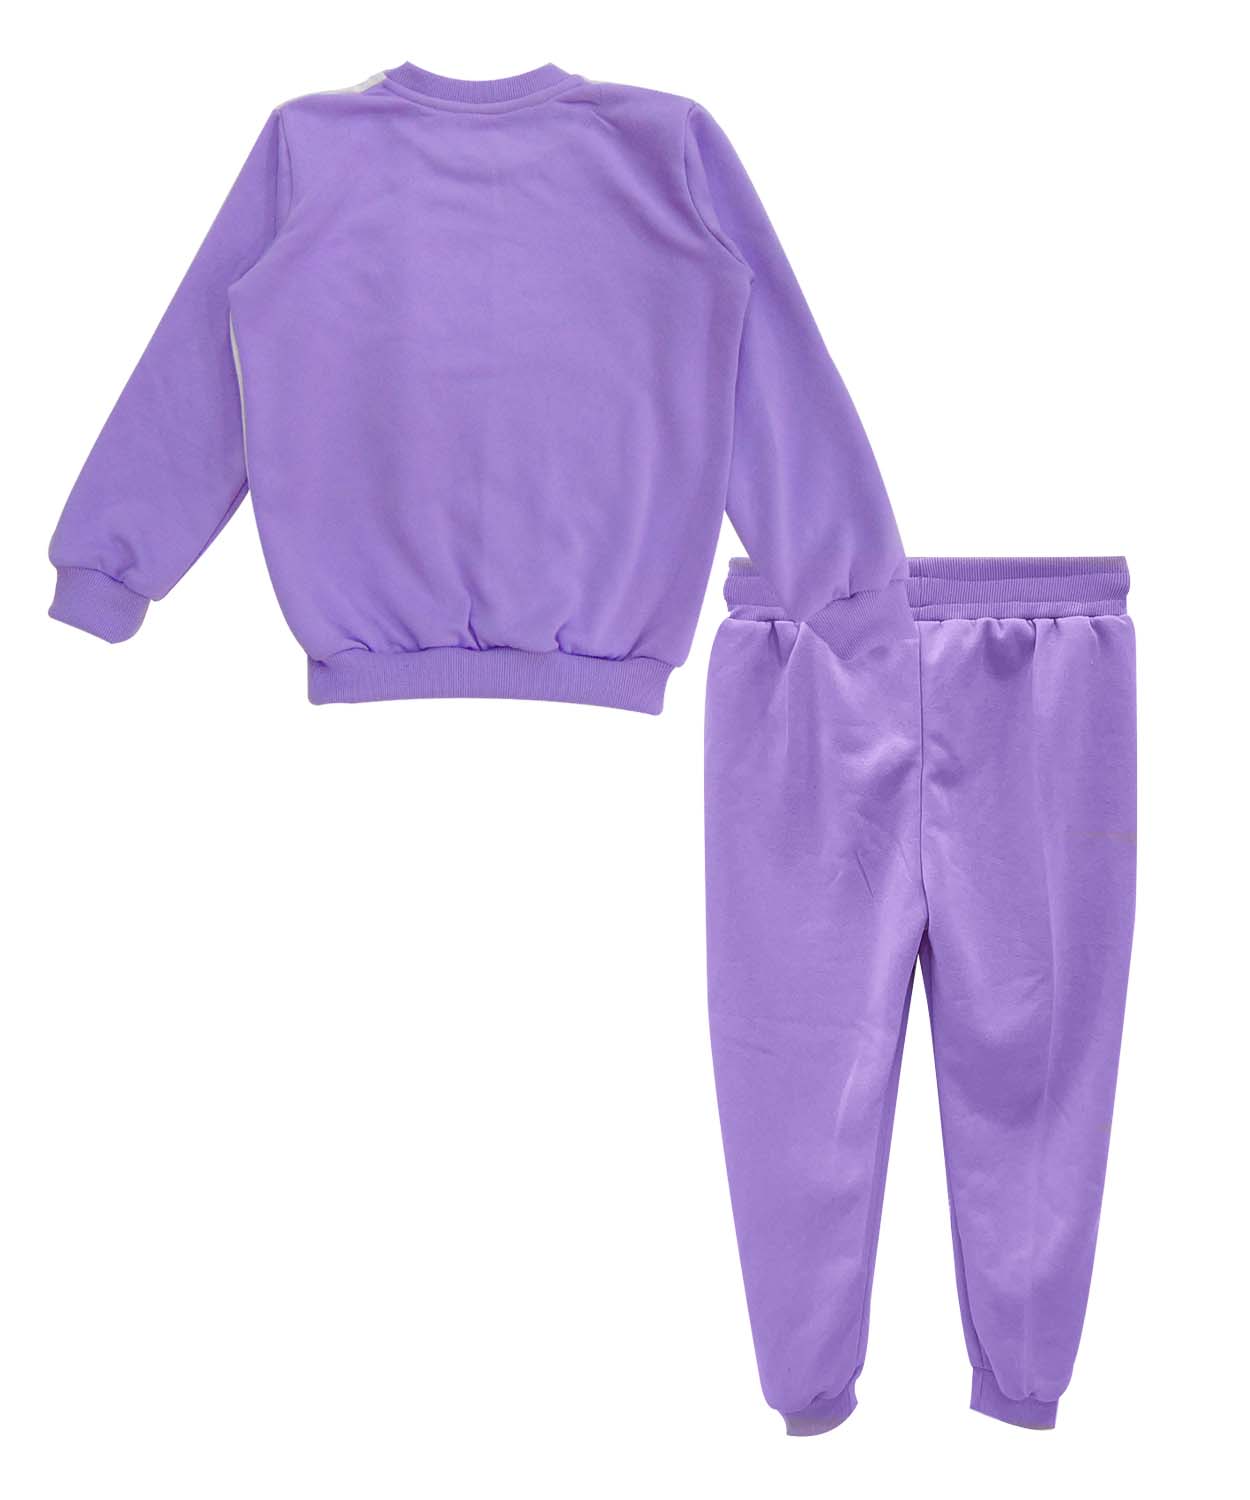 Buy Personalised White & Lavender Funsquad Tracksuit Online from Tiny ...